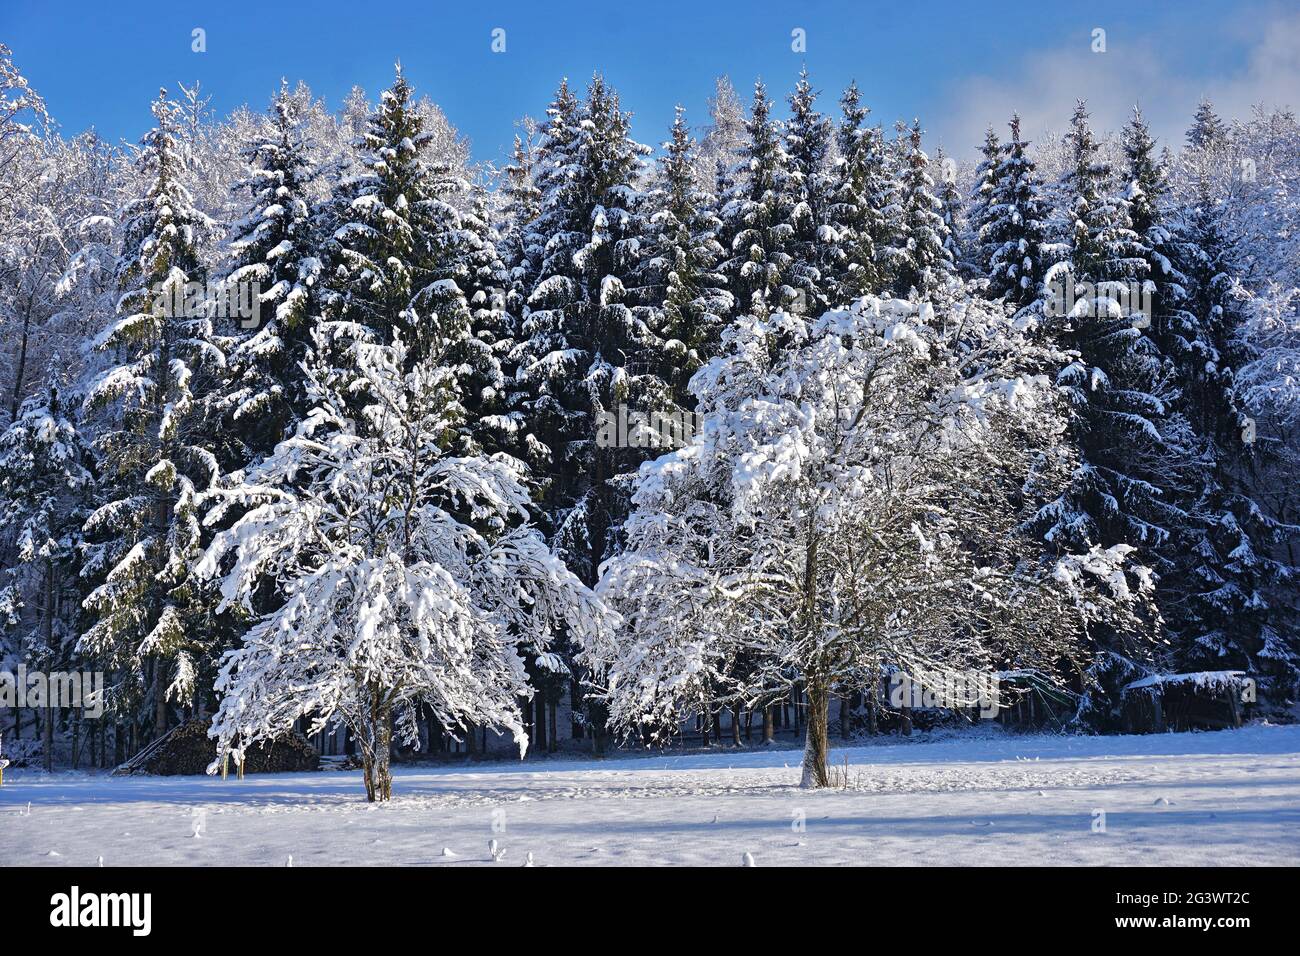 Snowy trees in front of wintry coniferous forest Stock Photo